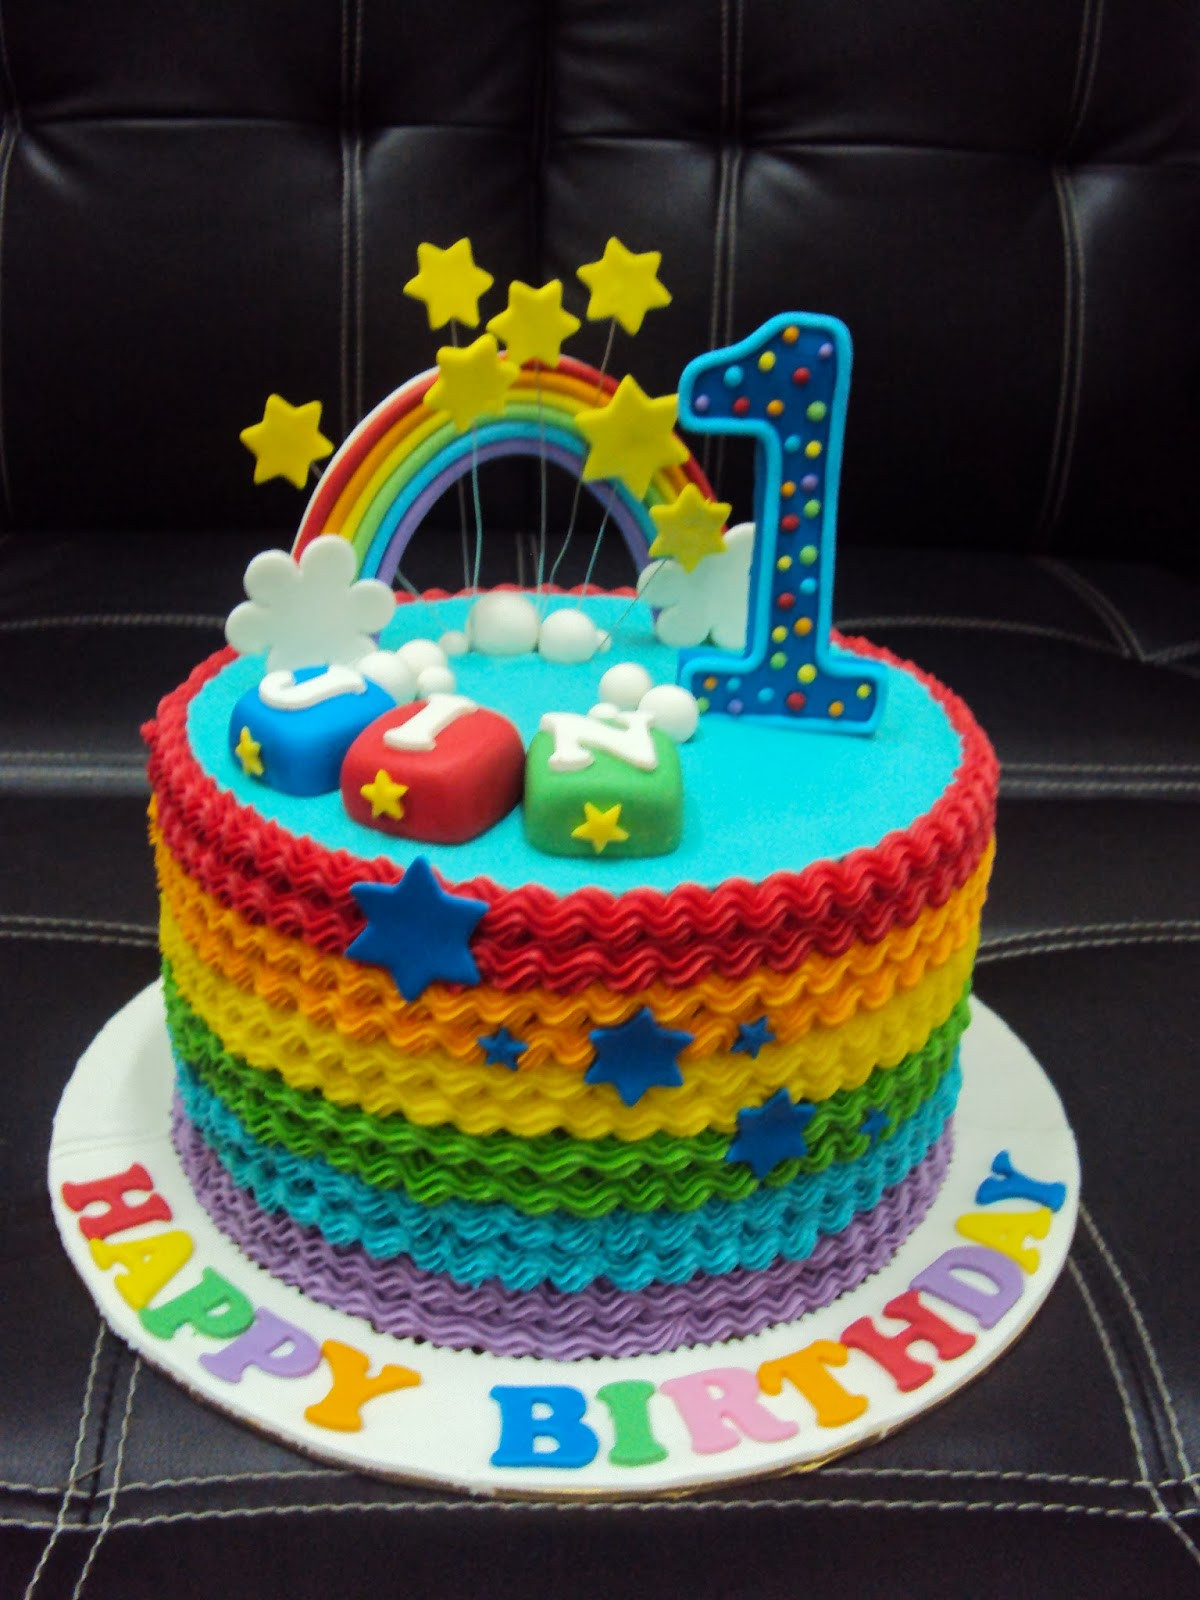 Themed Birthday Cakes
 L mis Cakes & Cupcakes Ipoh Contact 012